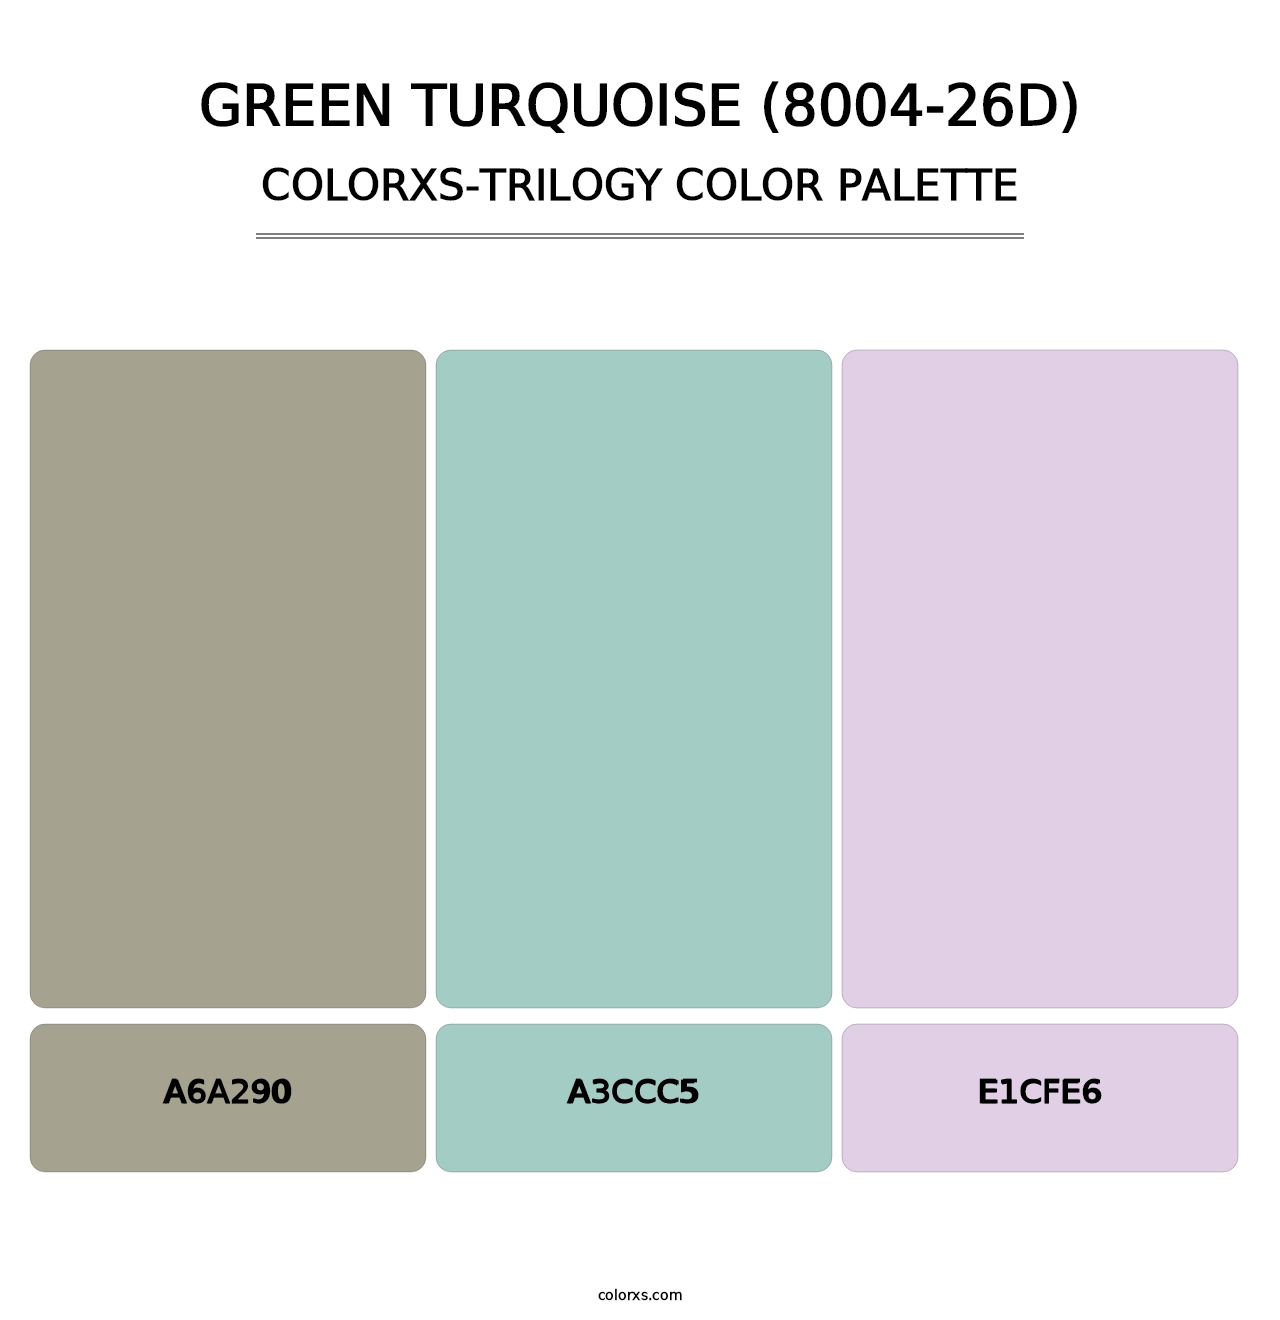 Green Turquoise (8004-26D) - Colorxs Trilogy Palette